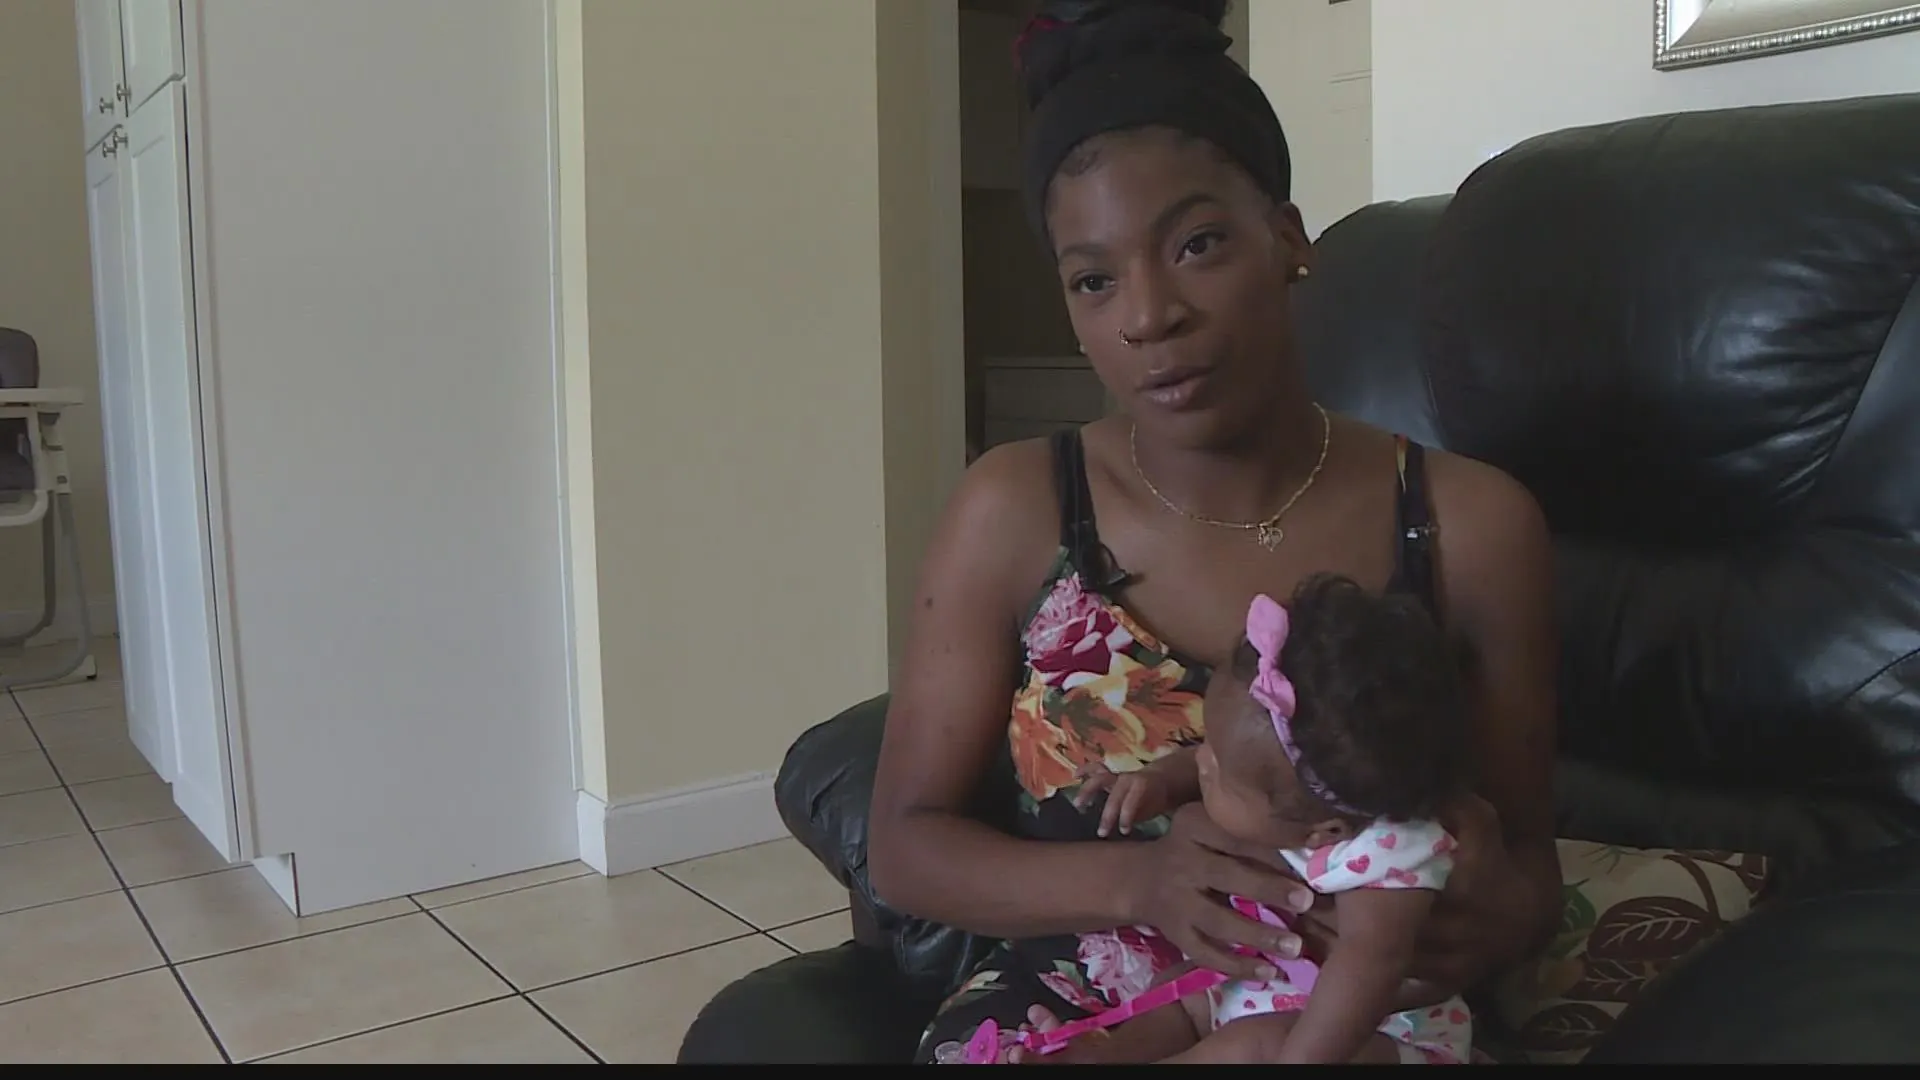 'I have nothing,' Single mother locked out of Texas City apartment and stripped of valuables